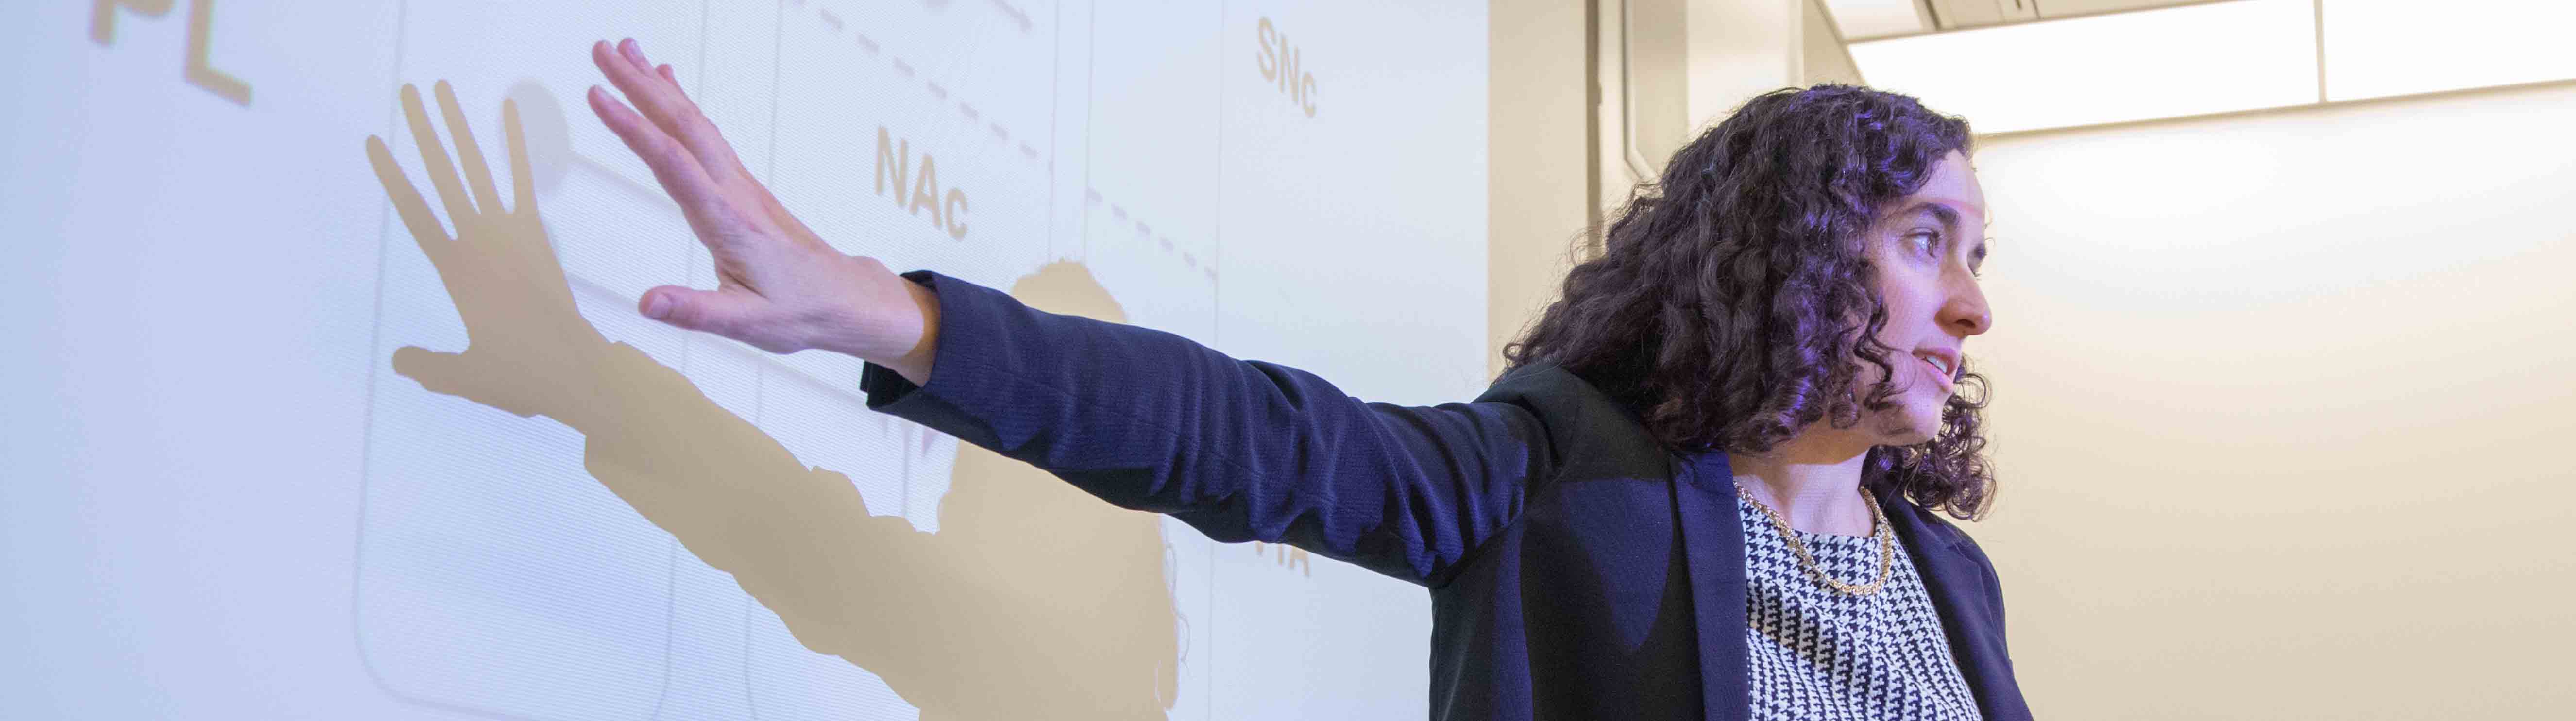 Professor Ilana B. Witten teaching a neuroscience course and pointing at the whiteboard